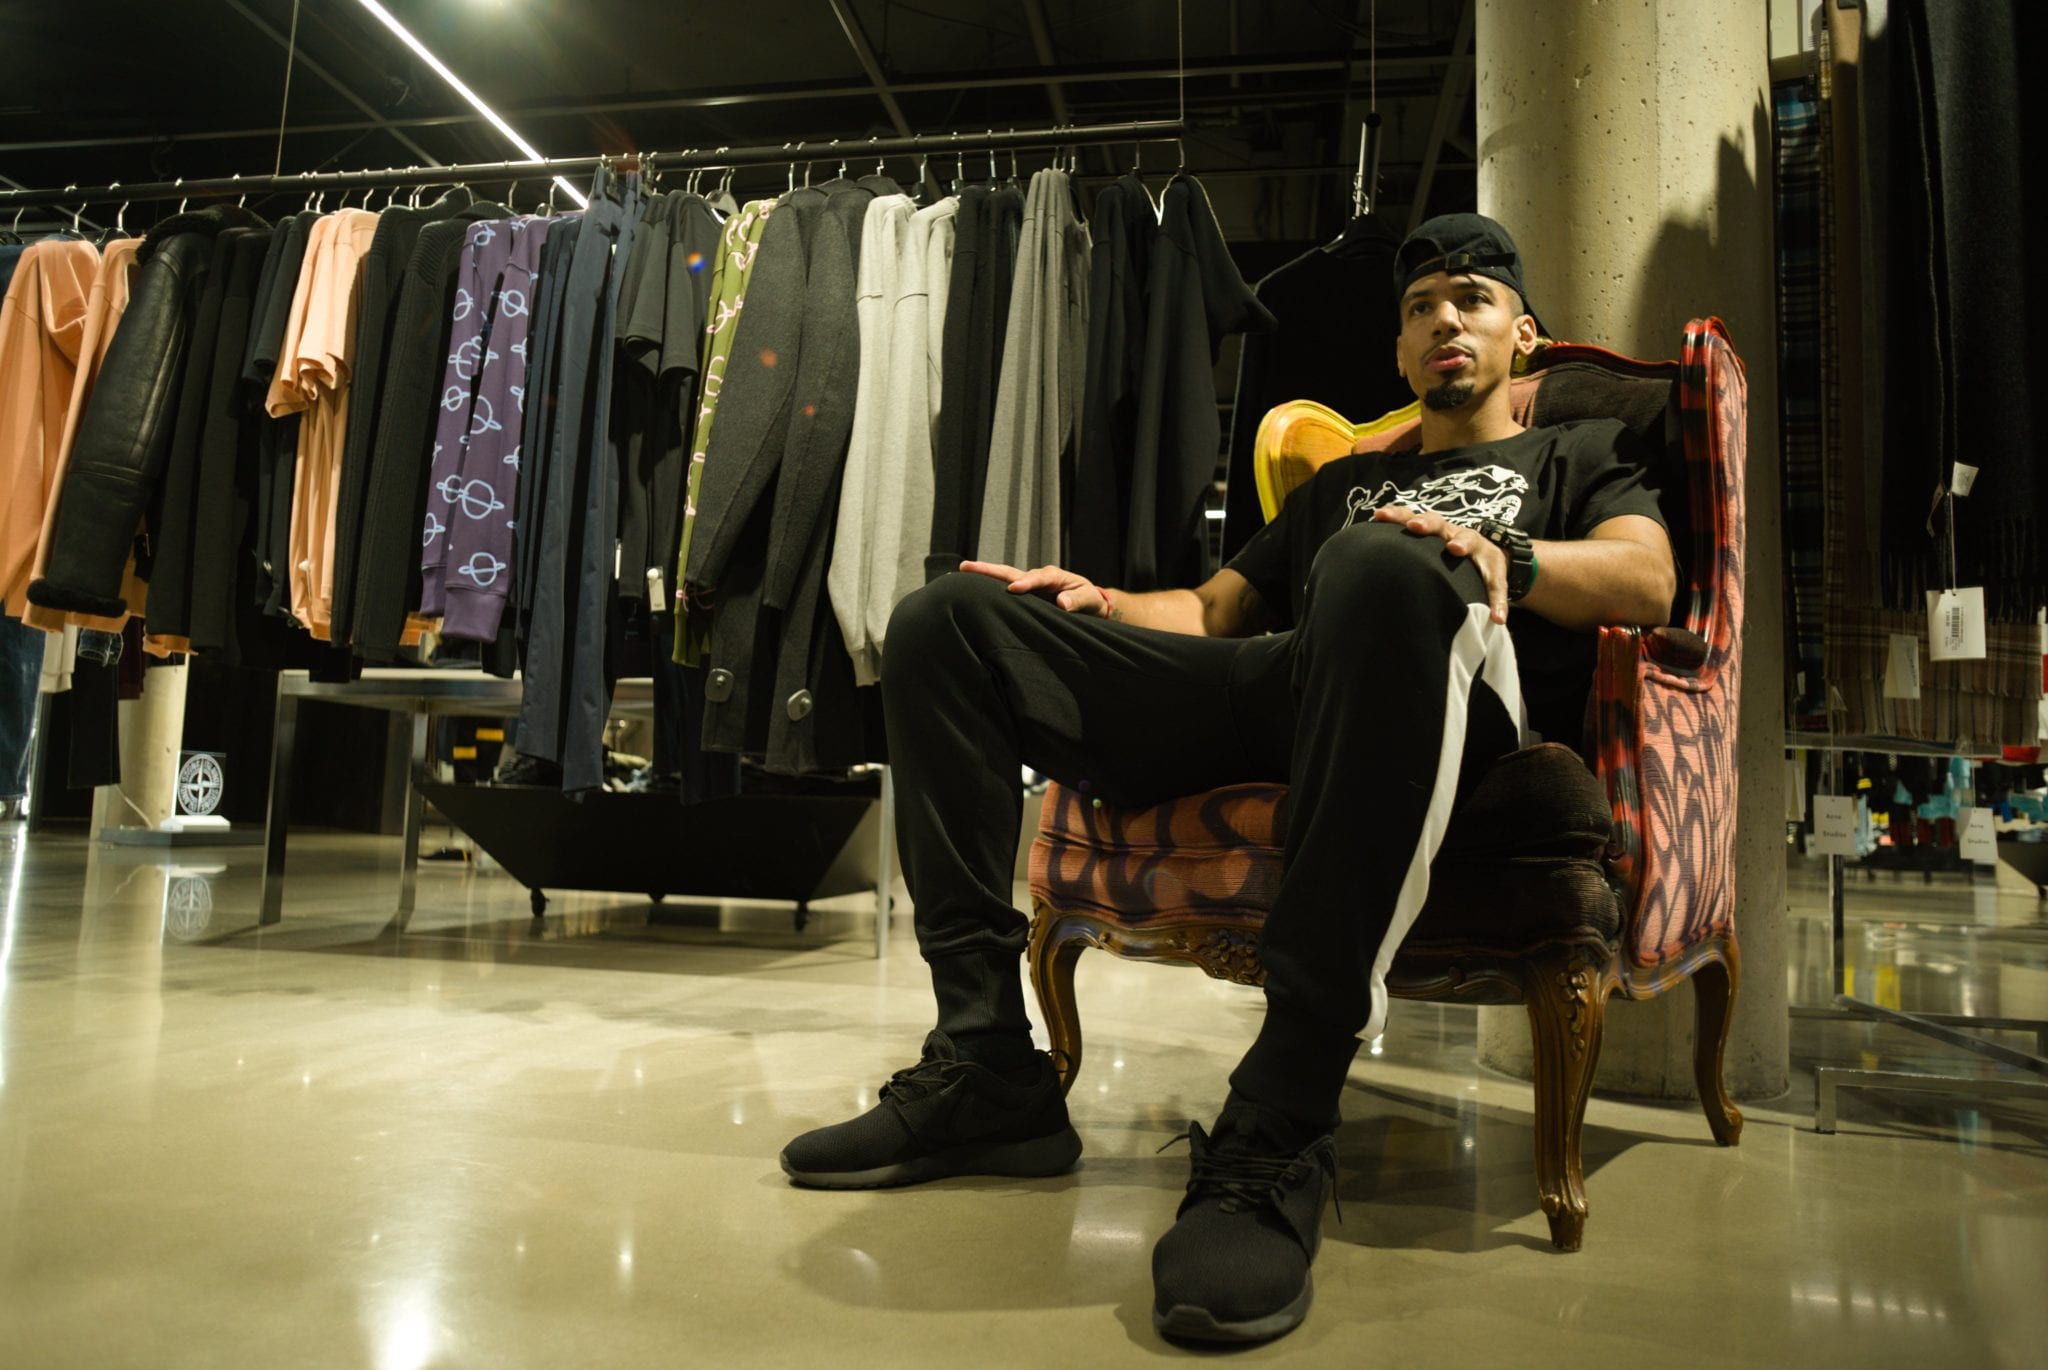 Danny Green kicks back at TNT - The New Trend in Toronto, Canada. (Elijah Marchand)